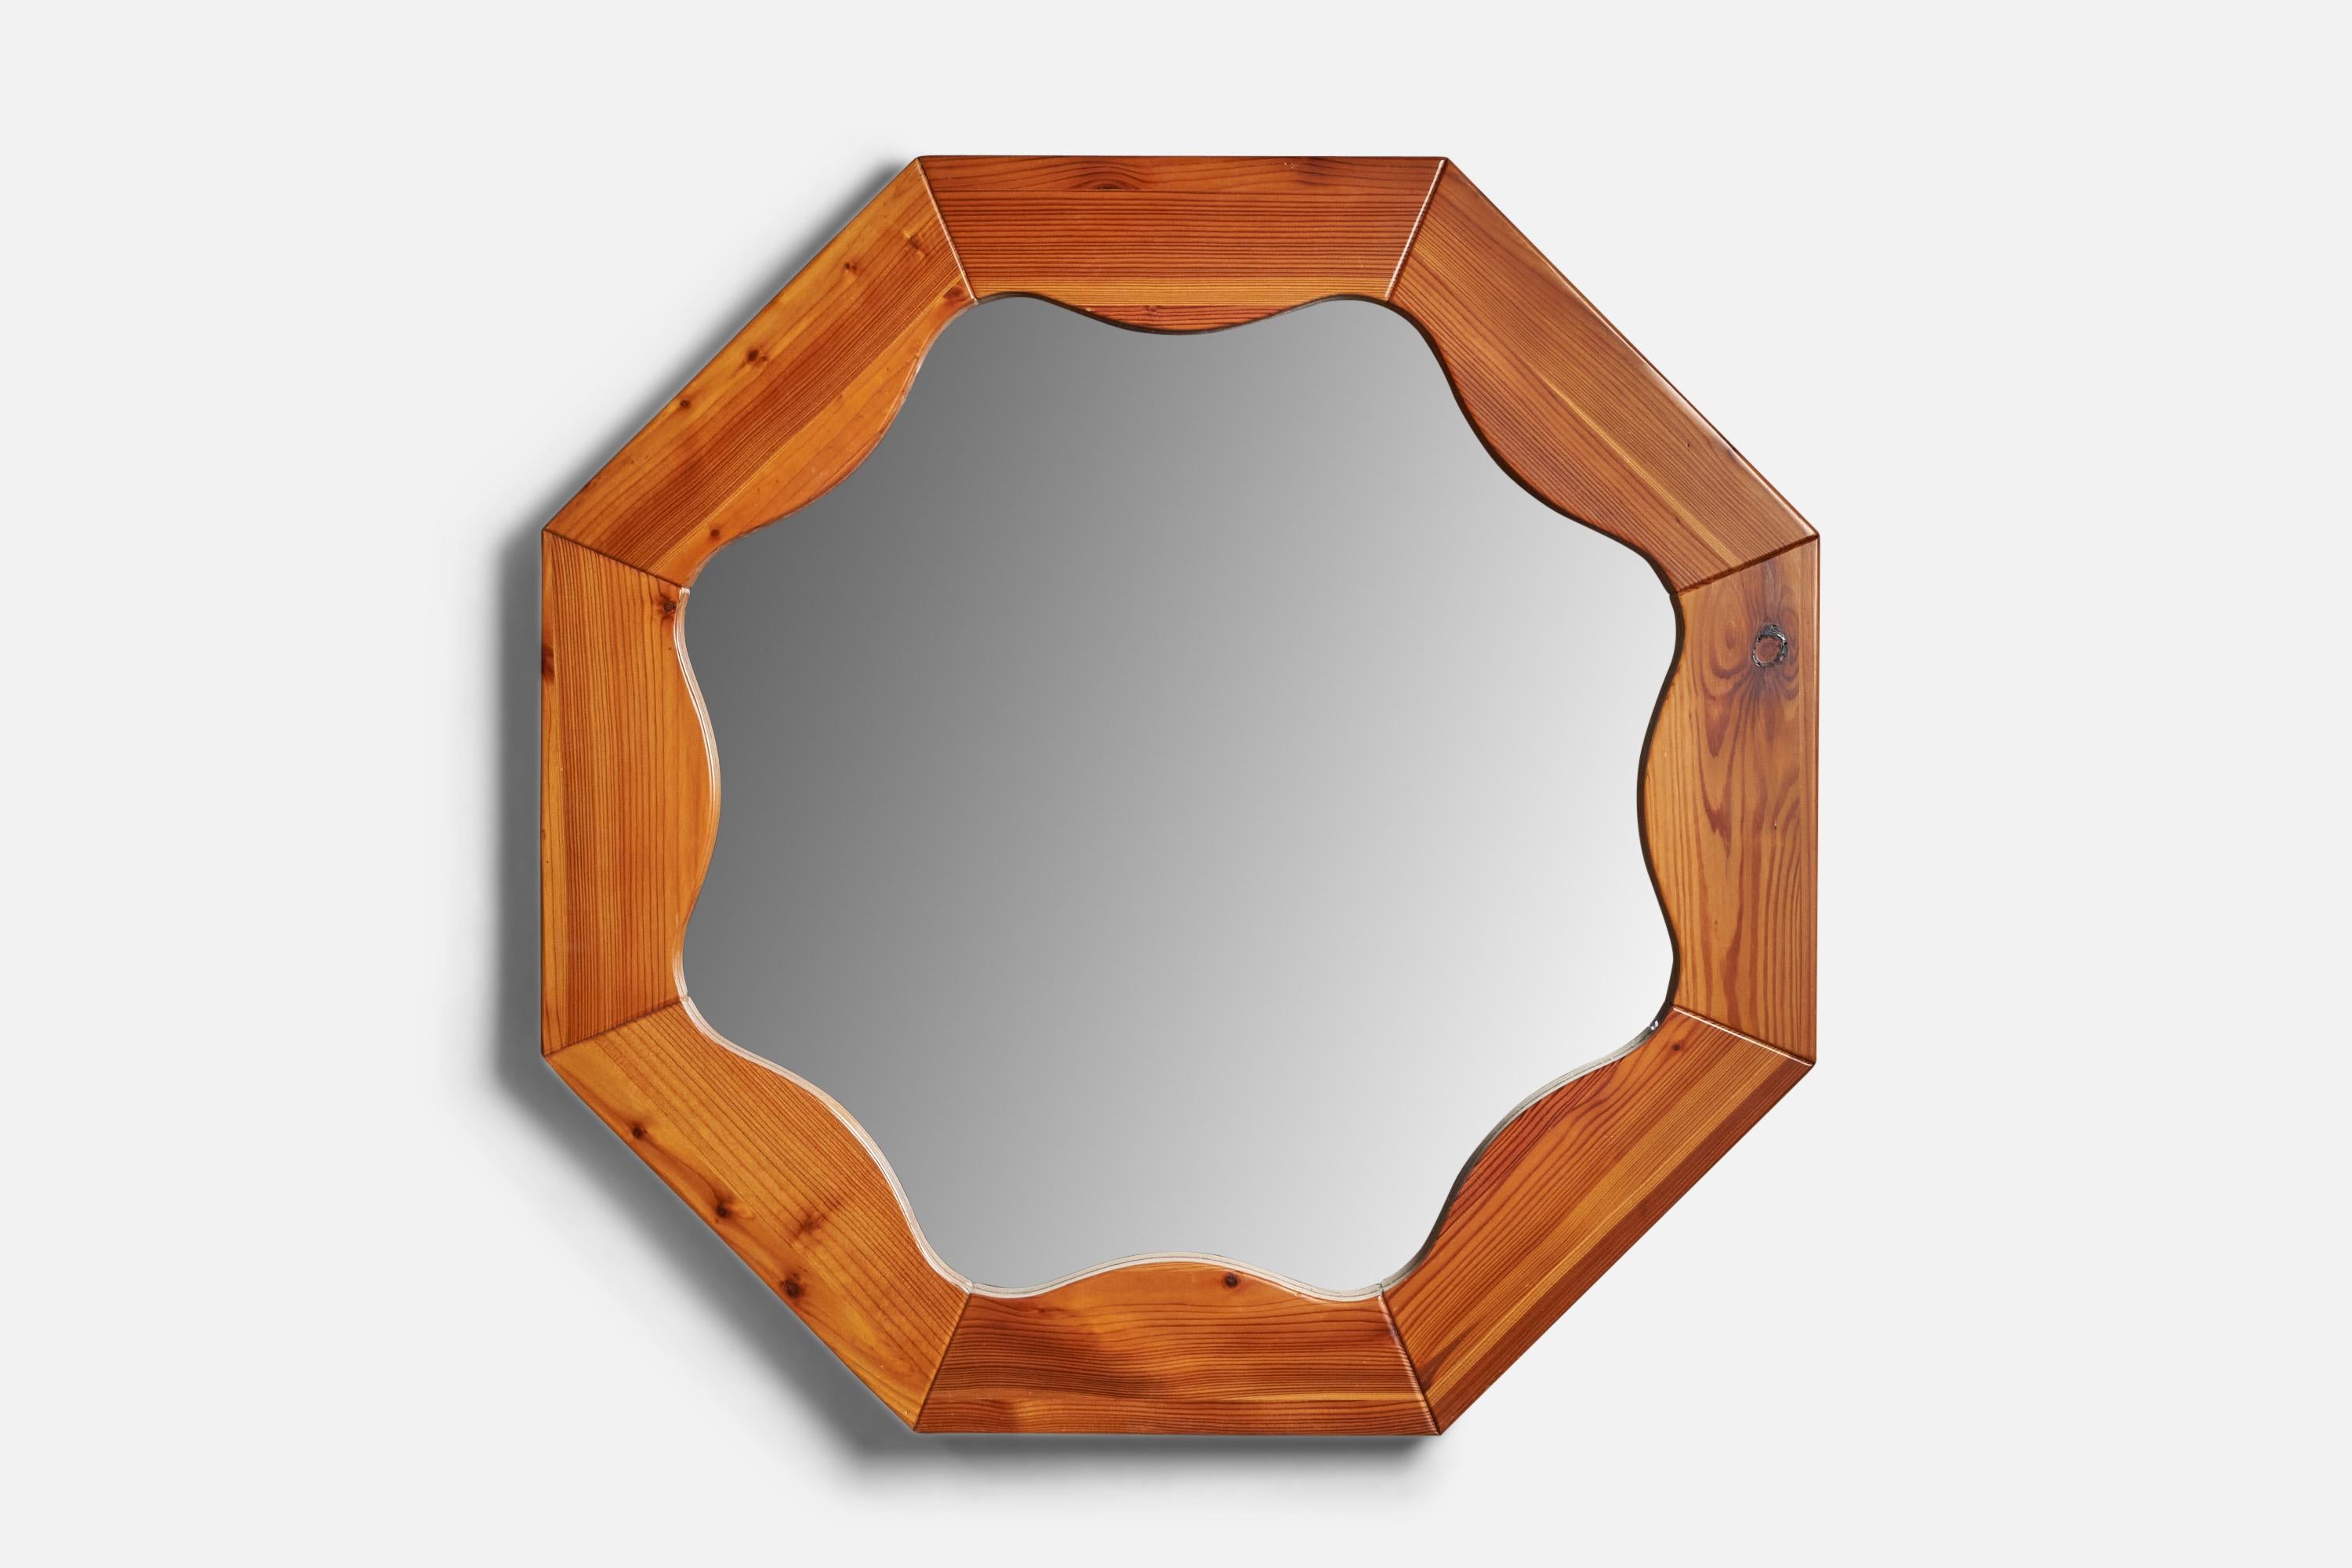 A sizeable wall mirror designed and produced in Sweden, c. 1970s.